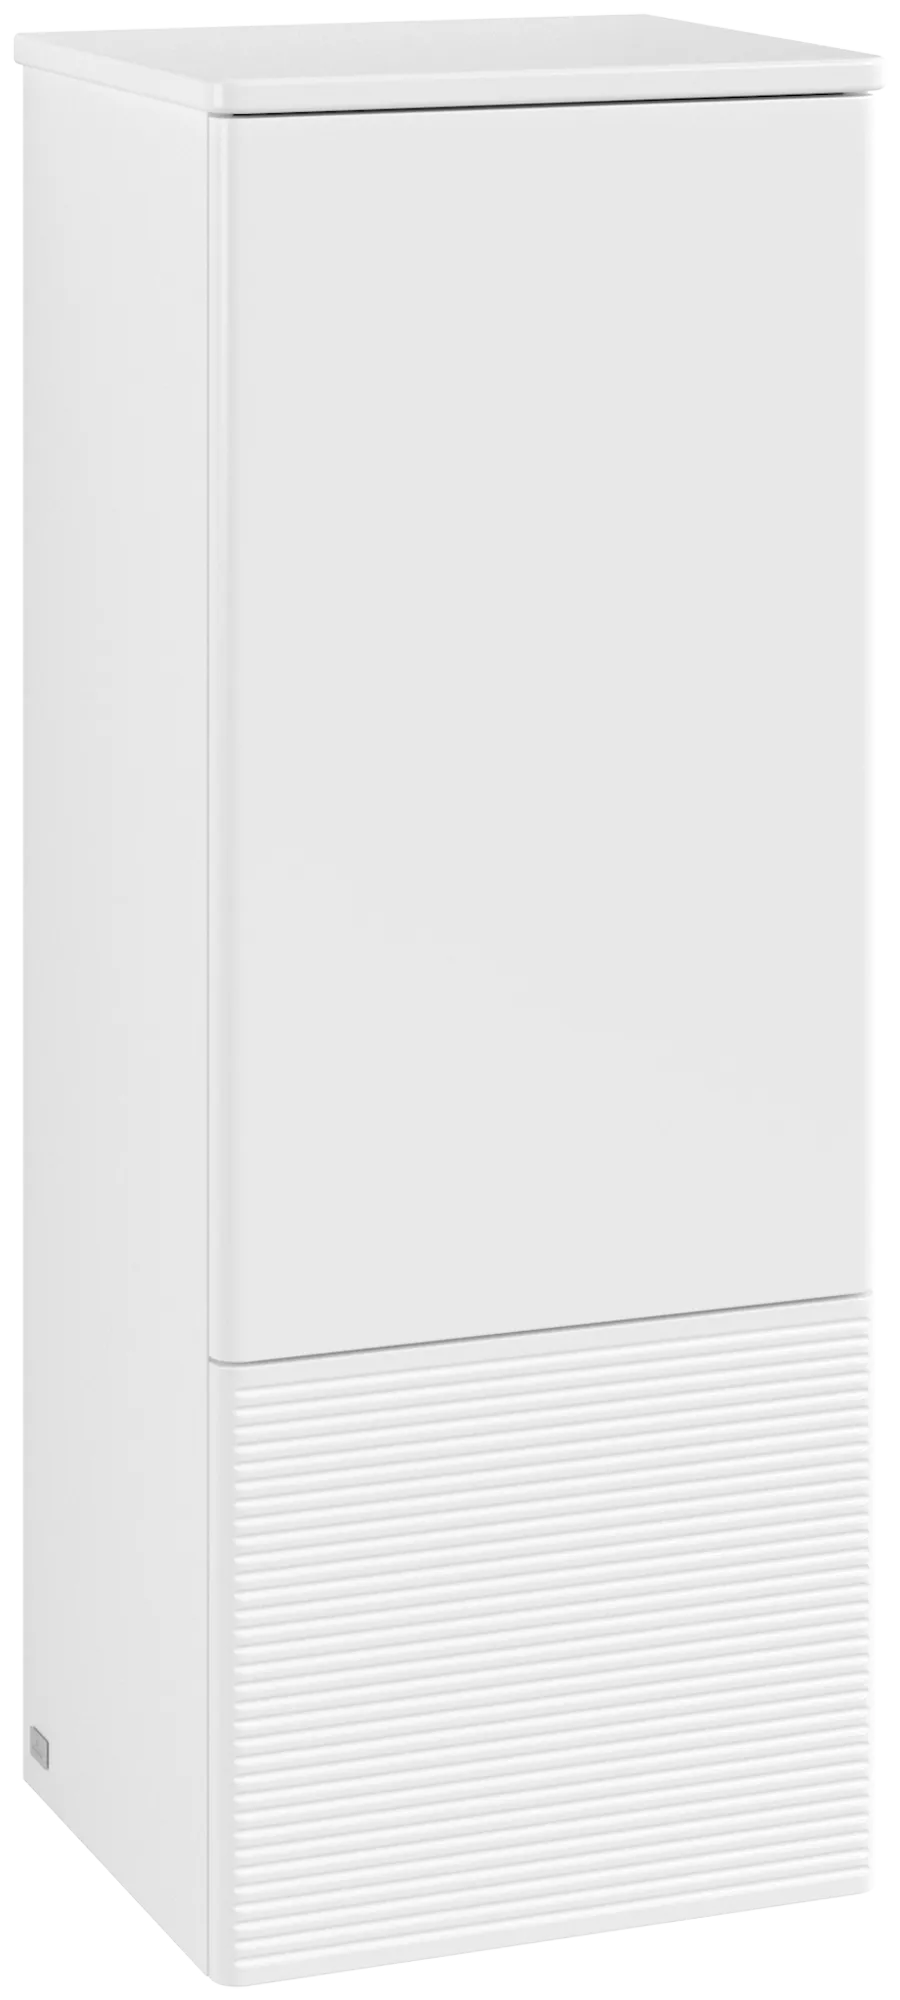 Picture of VILLEROY BOCH Antao Medium-height cabinet, 1 door, 414 x 1039 x 356 mm, Front with grain texture, White Matt Lacquer / White Matt Lacquer #L43100MT